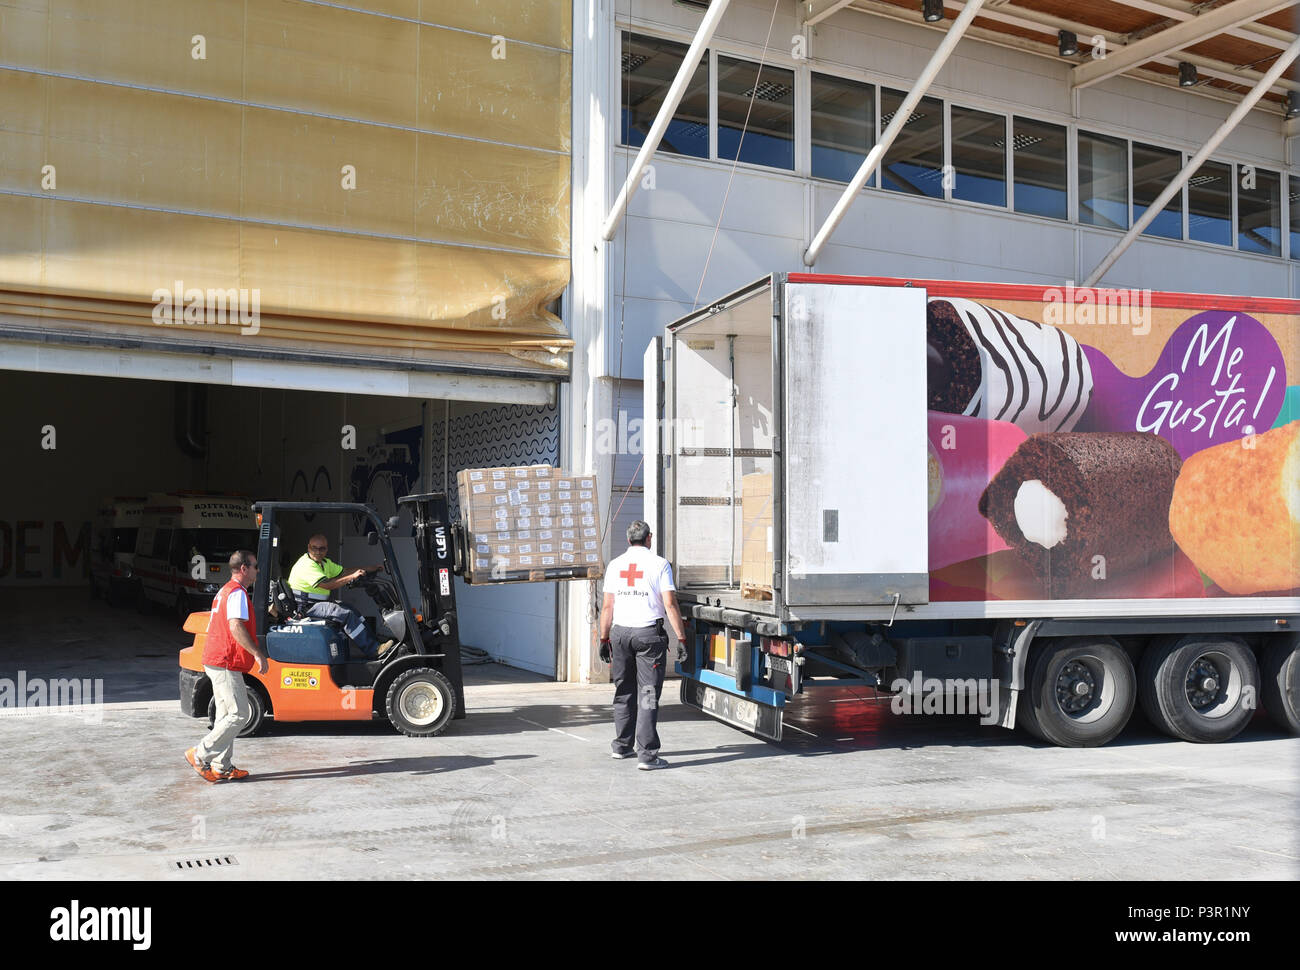 June 15, 2018 - Valencia, Spain: Spanish Red Cross workers unload a truck carrying aid for migrants rescued by the Aquarius rescue ship, in a warehouse in the port of Valencia. The Aquarius migrant rescue ship is expected to dock in the port of Valencia this week-end after Italy and Malta rejected it. ***FRANCE OUT / NO SALES  IN SWEDEN, DENMARK, NORWAY, FINLAND BEFORE JUNE 25, 2018*** Stock Photo